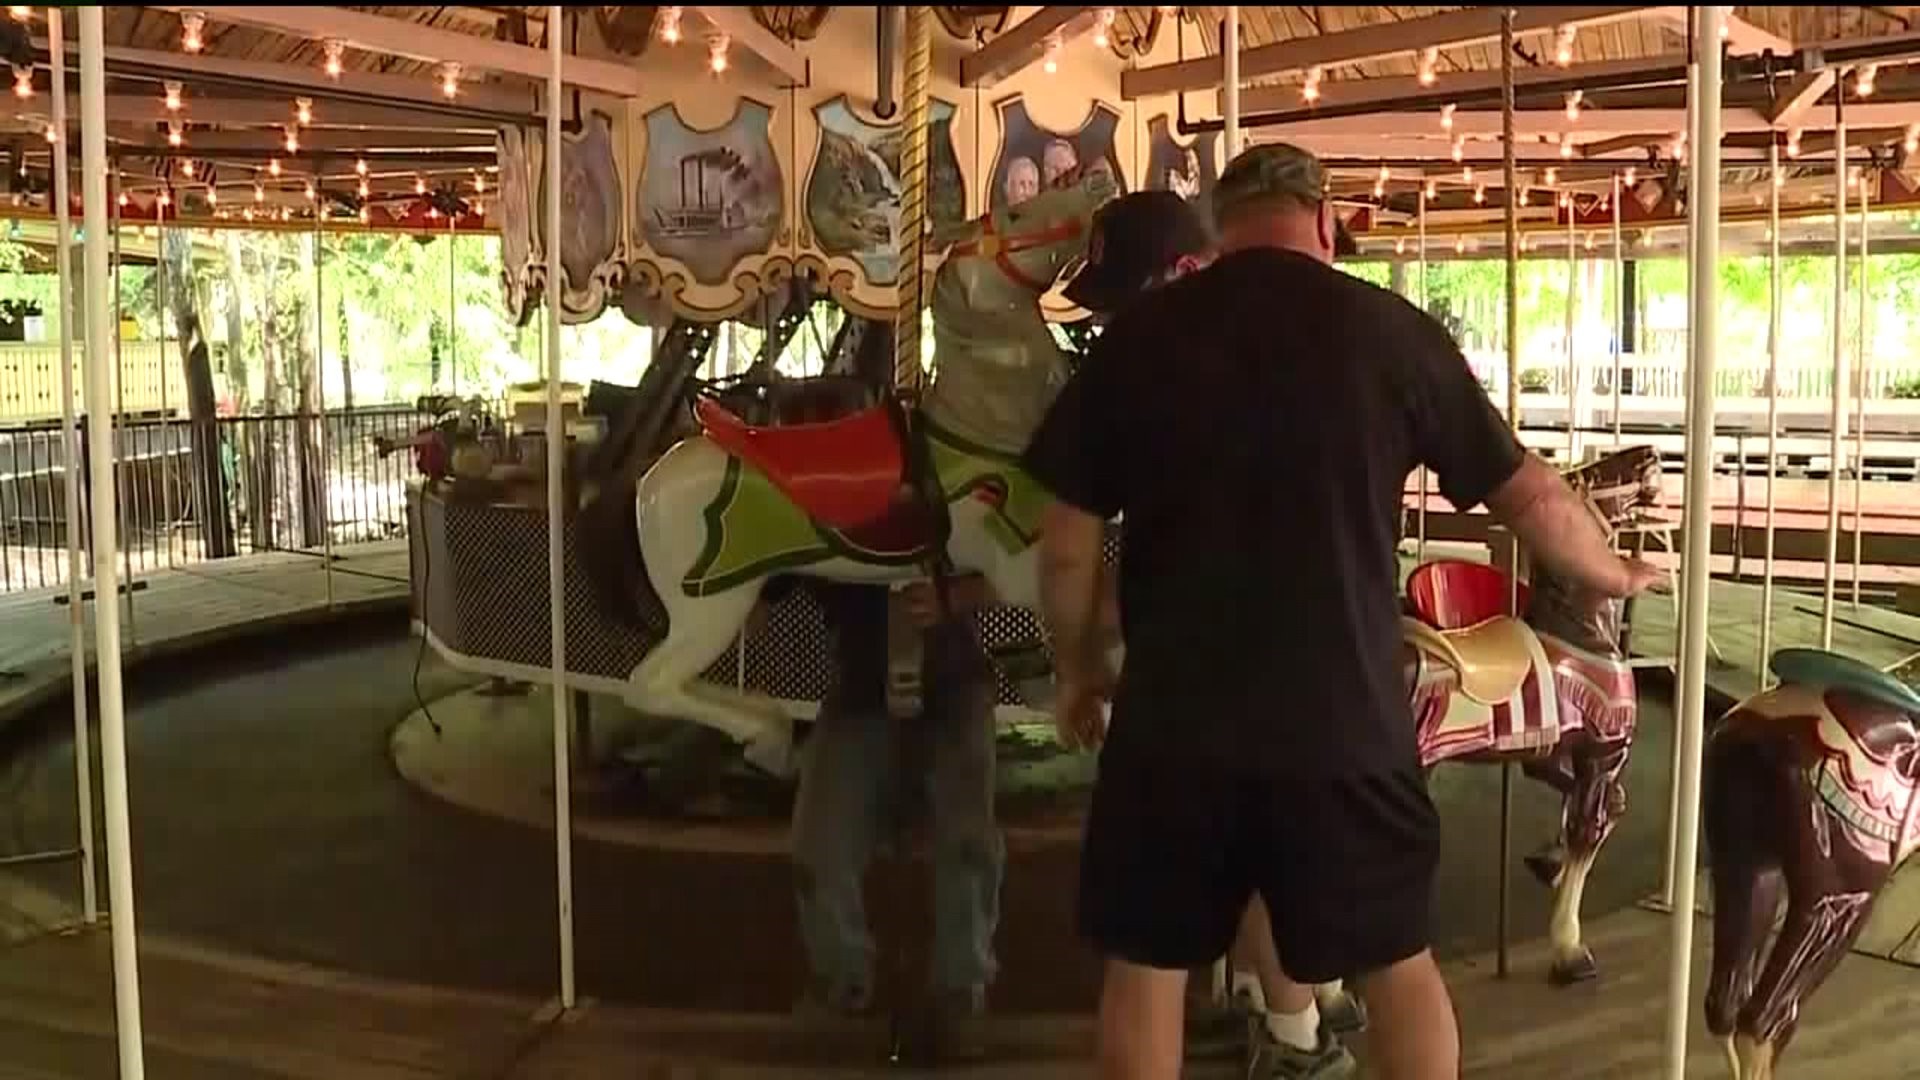 Knoebels Getting Ready to Reopen